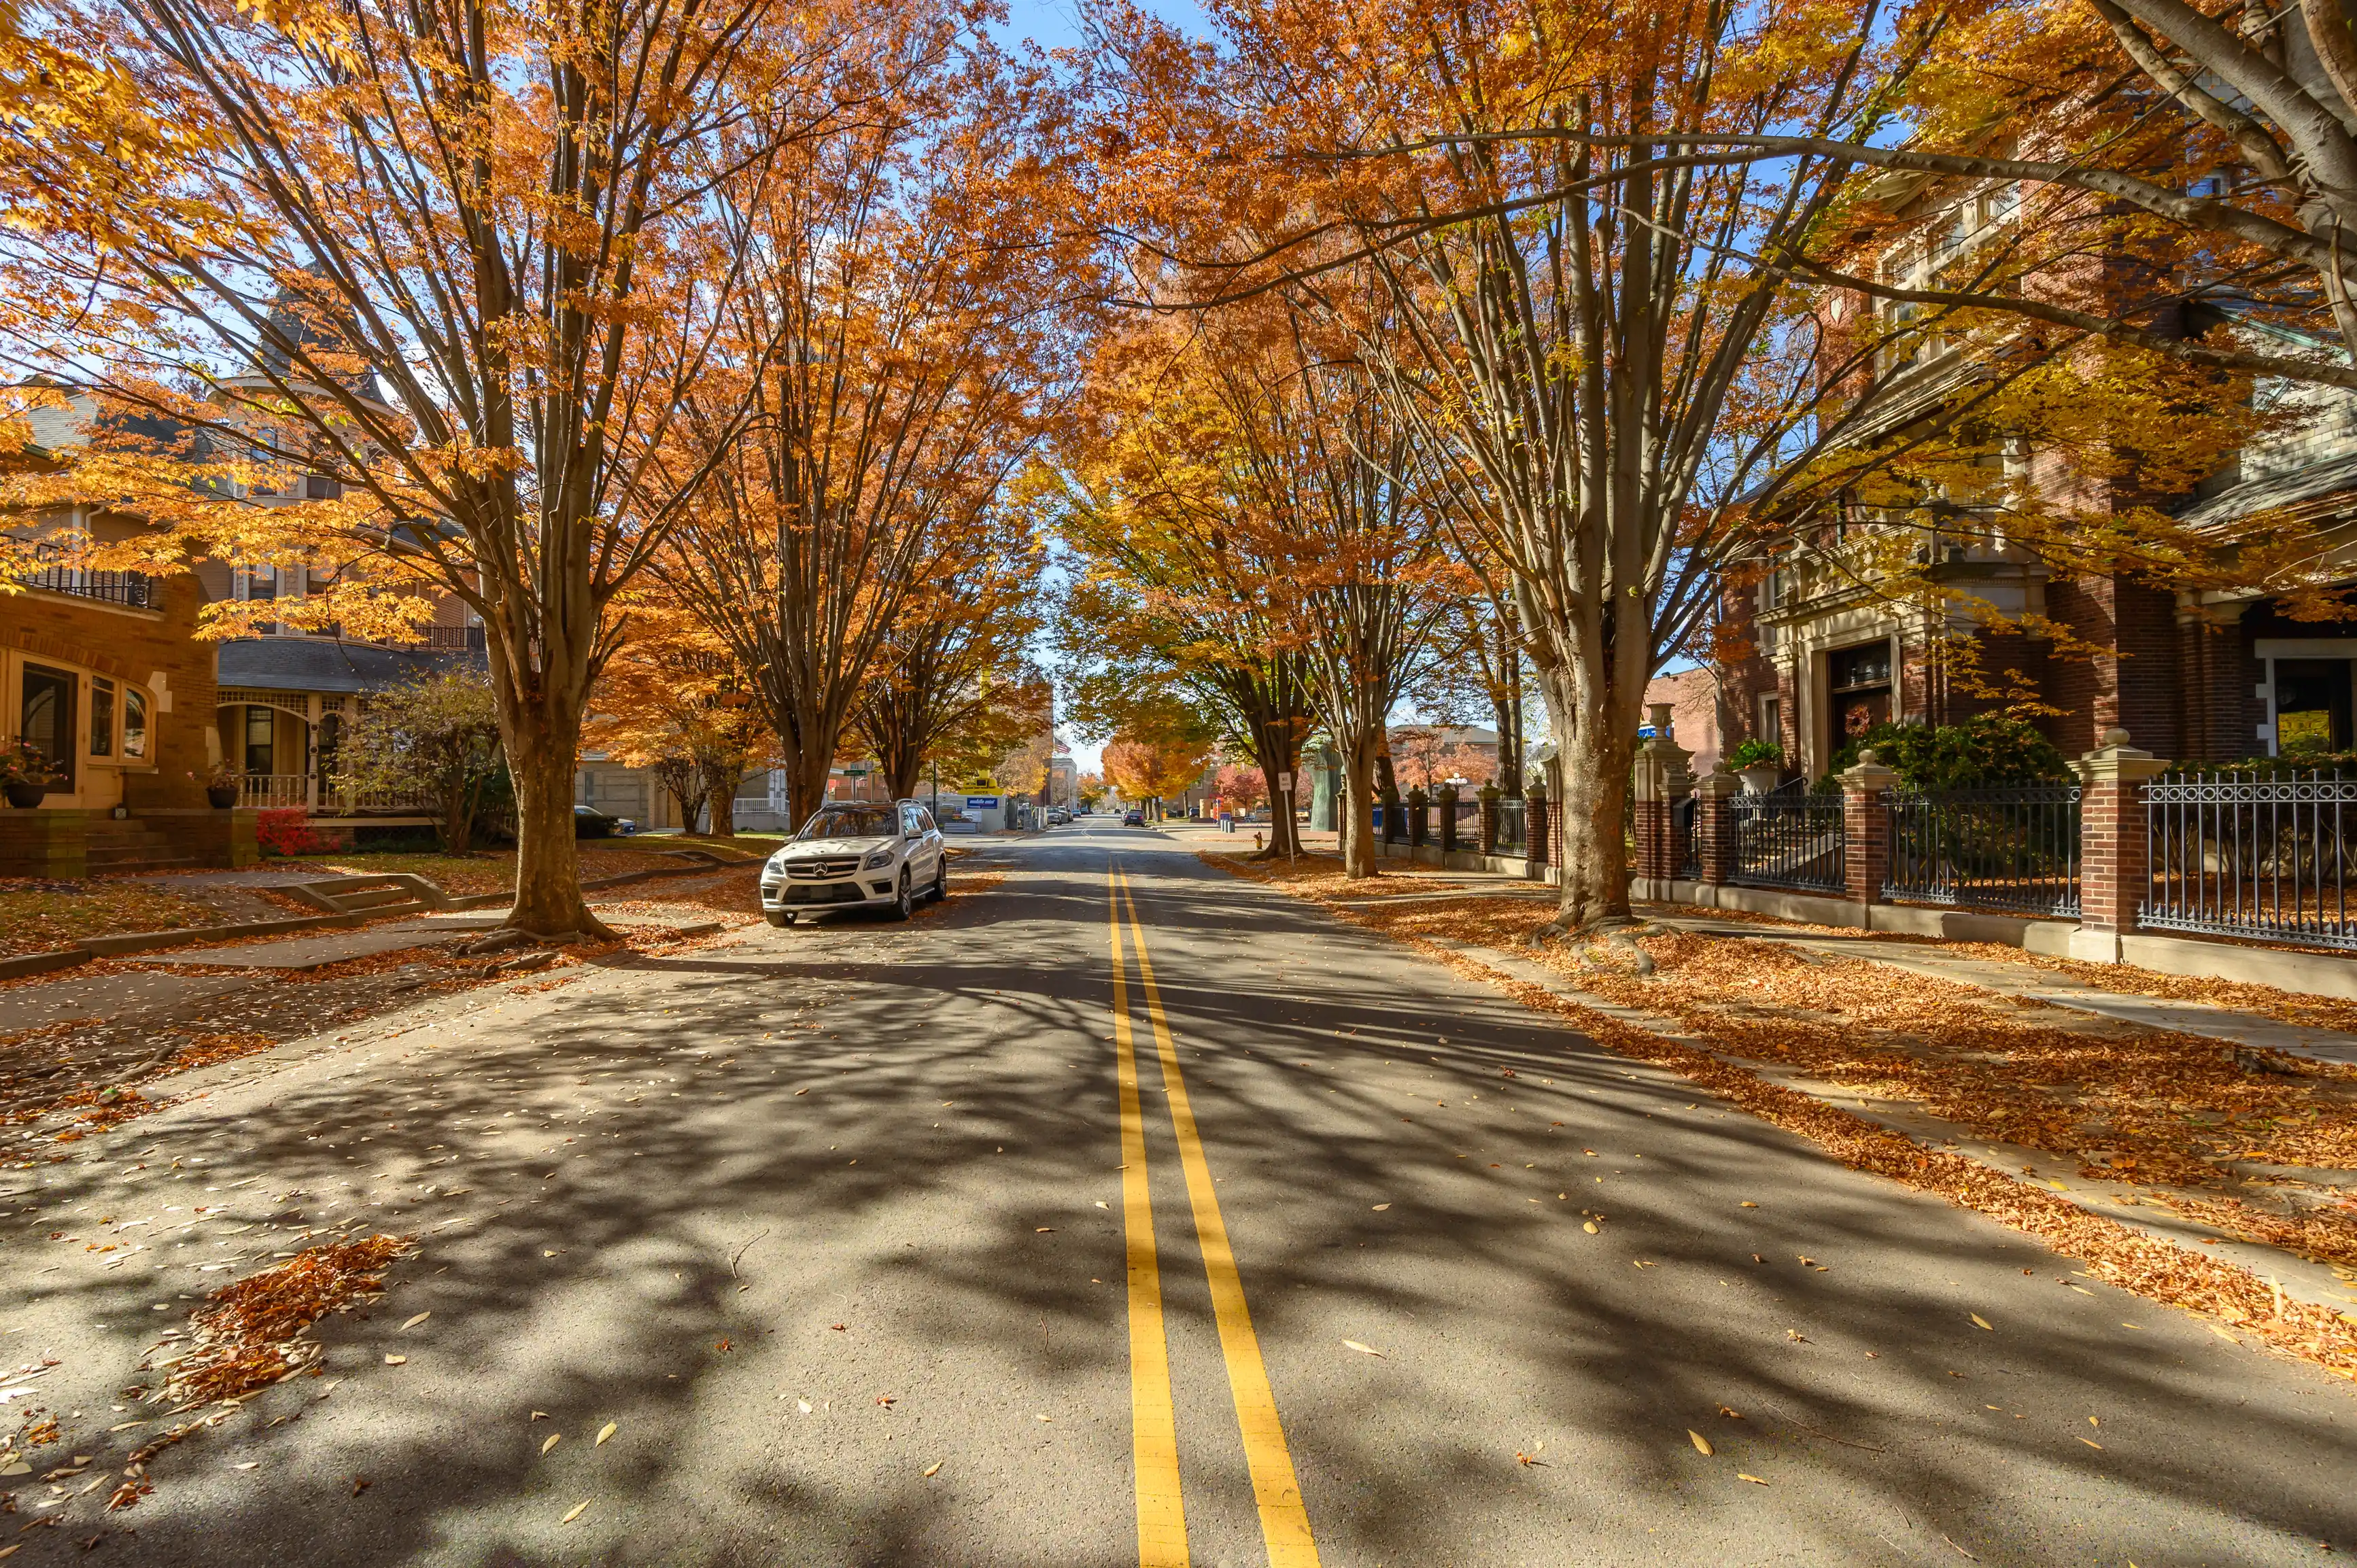 A serene autumn street lined with trees in full fall foliage, casting shadows on the road, with parked cars and traditional houses on either side.